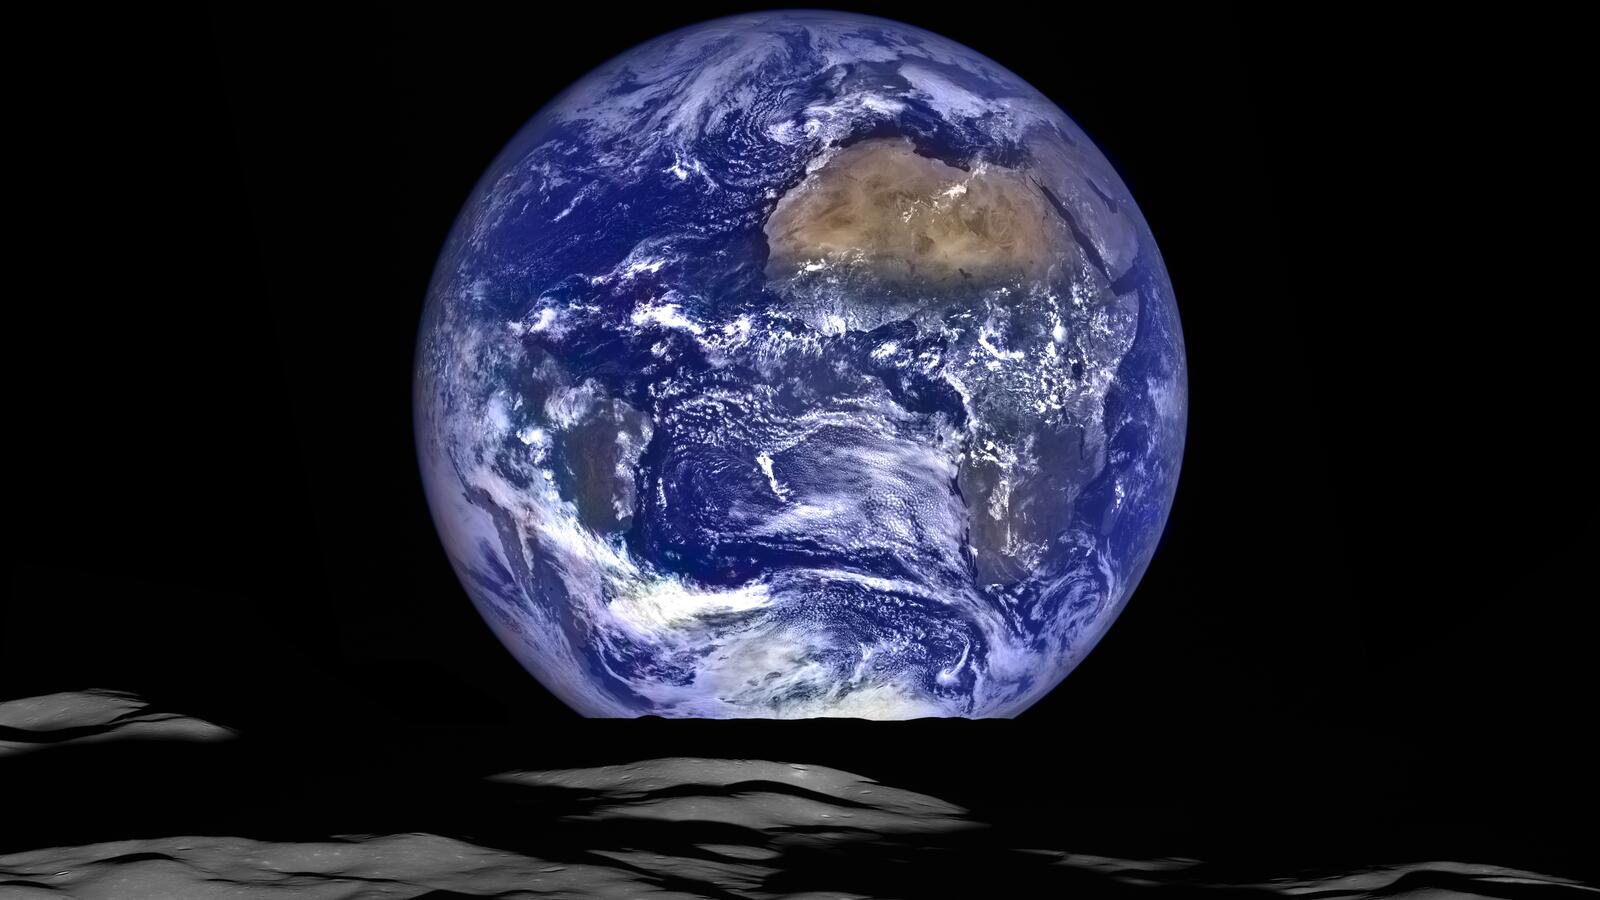 Wallpapers galaxy planet earth from moon on the desktop